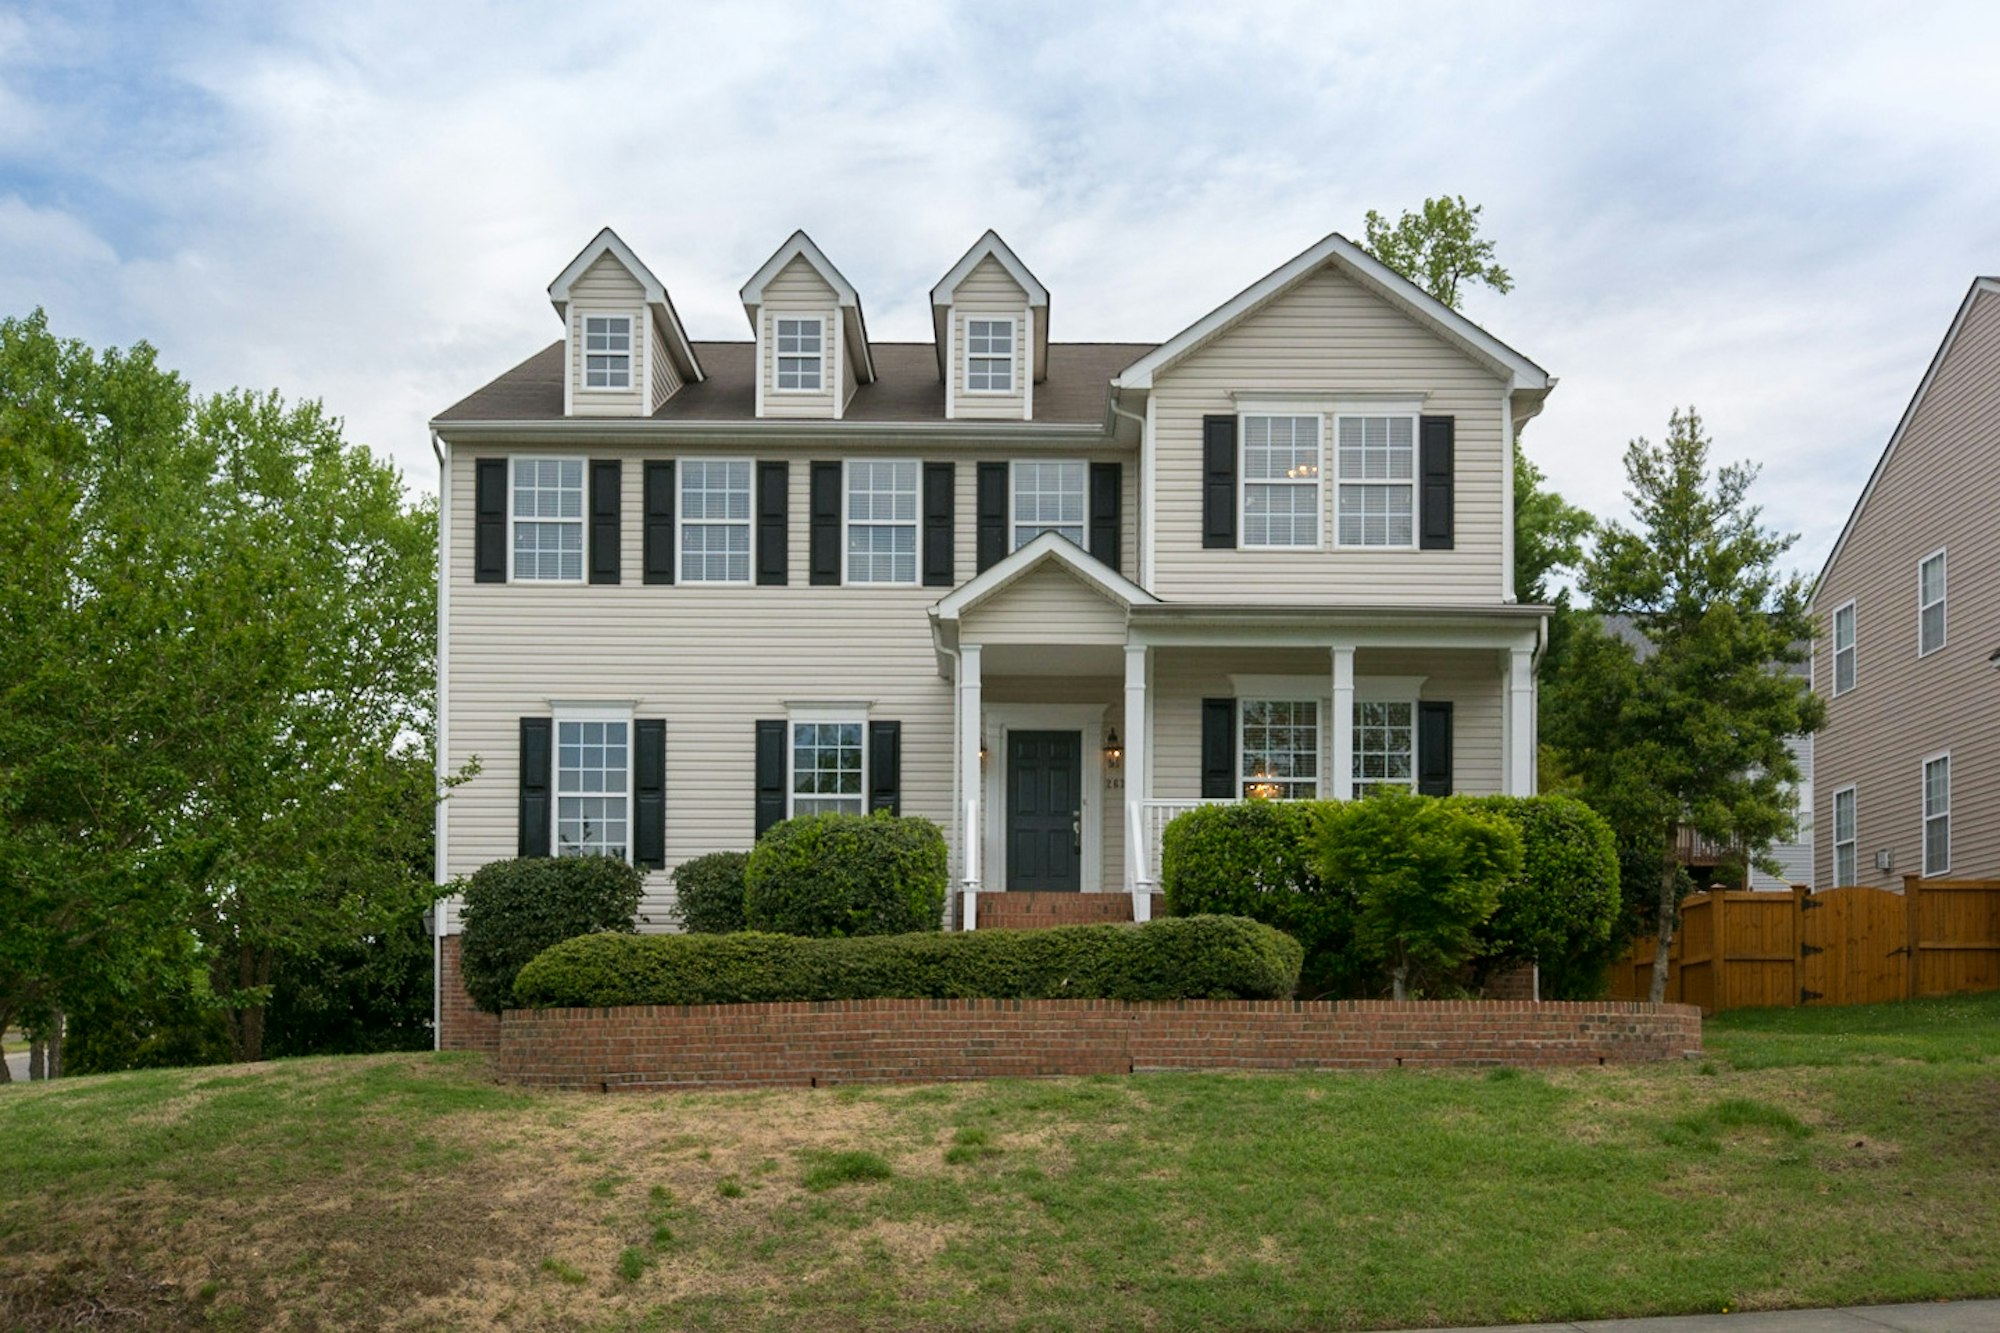 Photo 1 of 23 - 2632 Gross Ave, Wake Forest, NC 27587